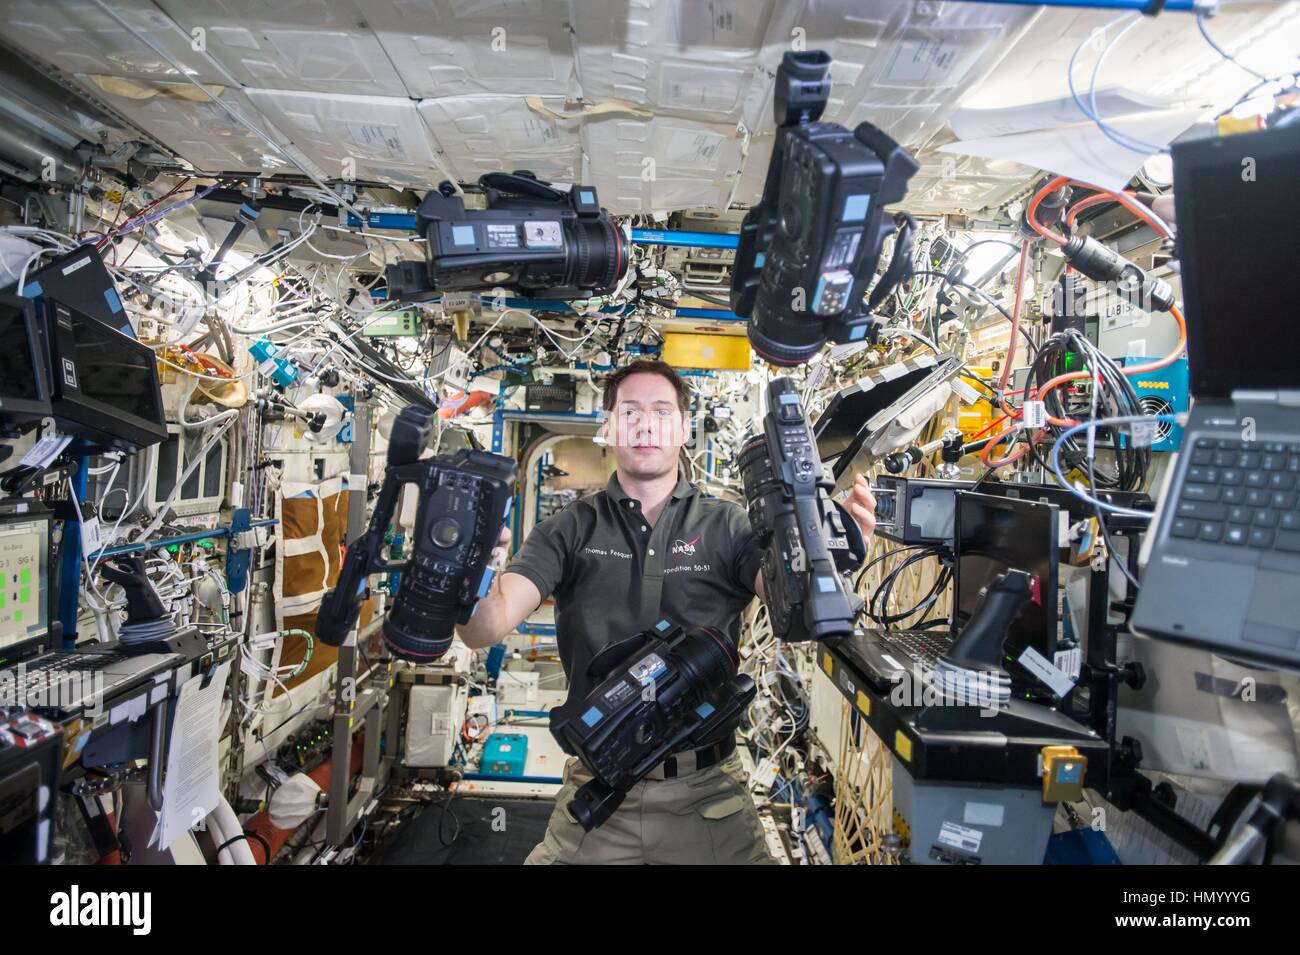 NASA Expedition 50 prime crew member French astronaut Thomas Pesquet of the European Space Agency juggles a set of video cameras in microgravity aboard the International Space Station December 19, 2016 in Earth orbit. Stock Photo